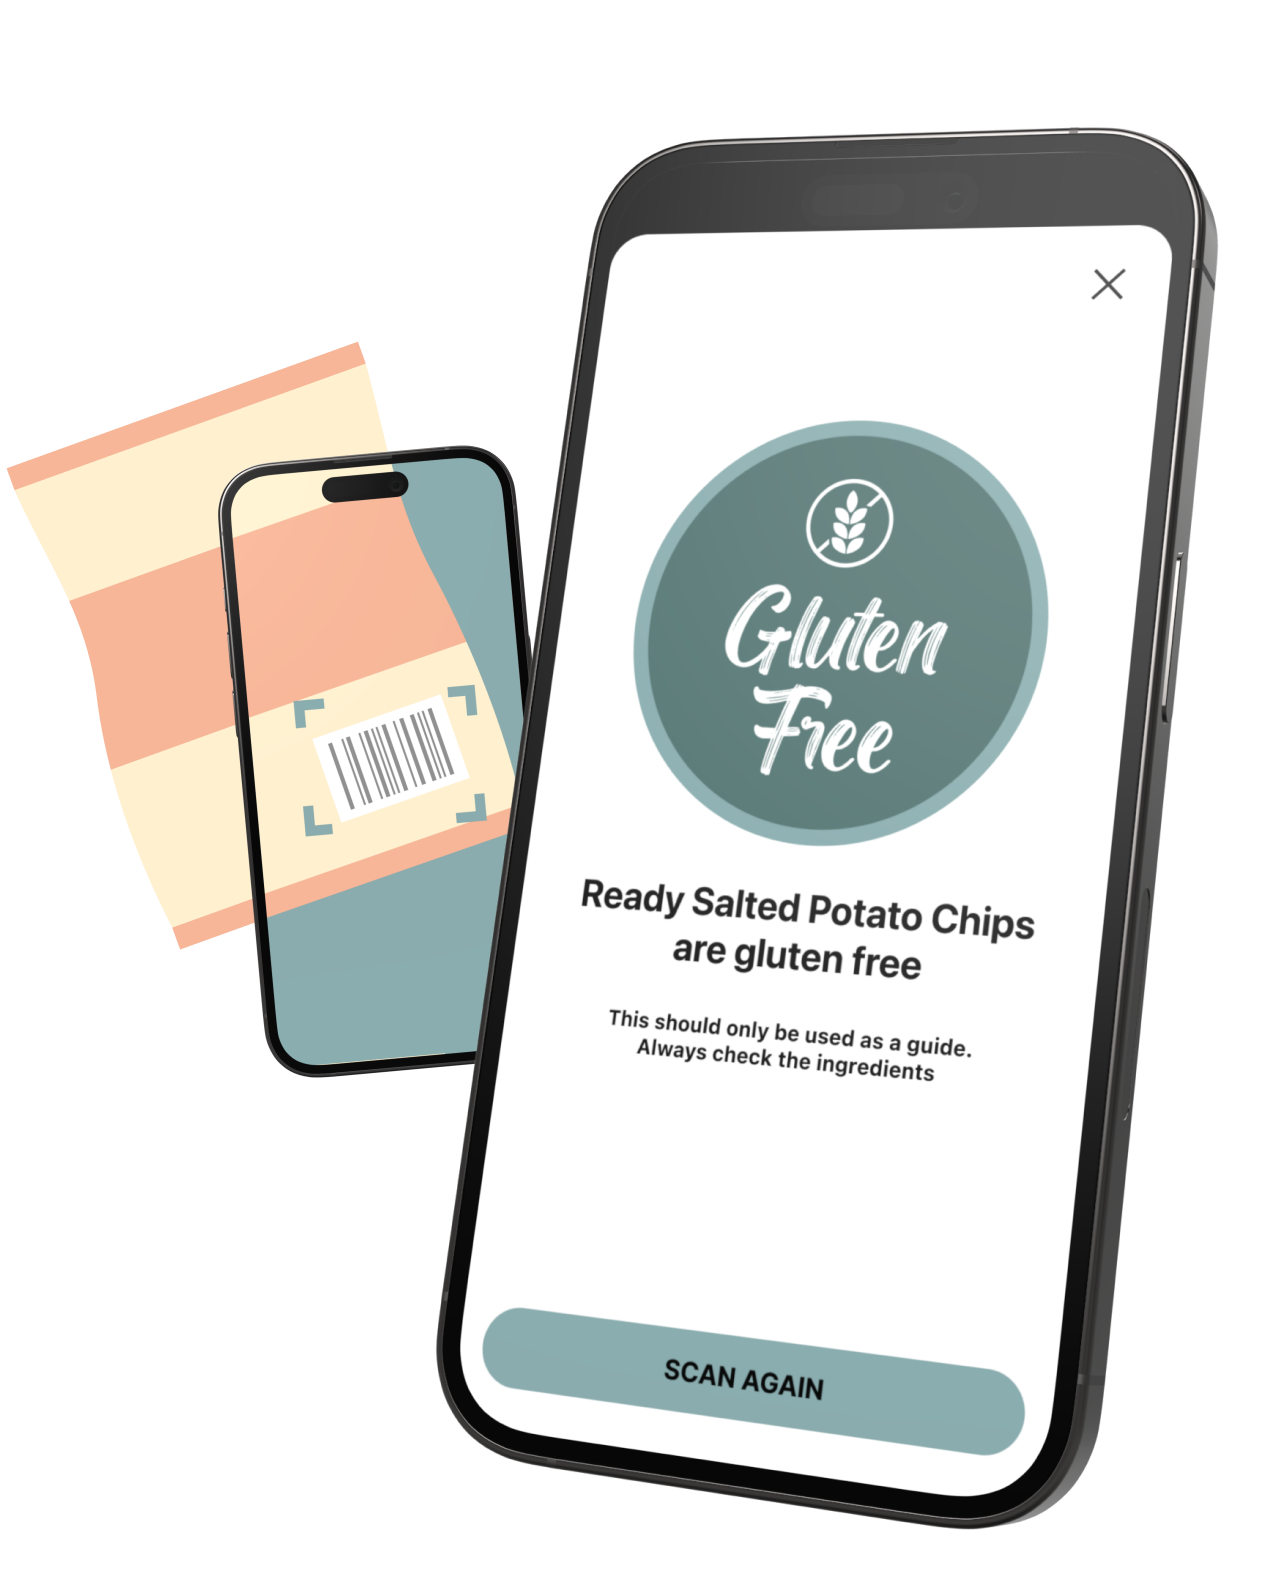 Two iPhones showing the user interface for GLuten Free Scanner app